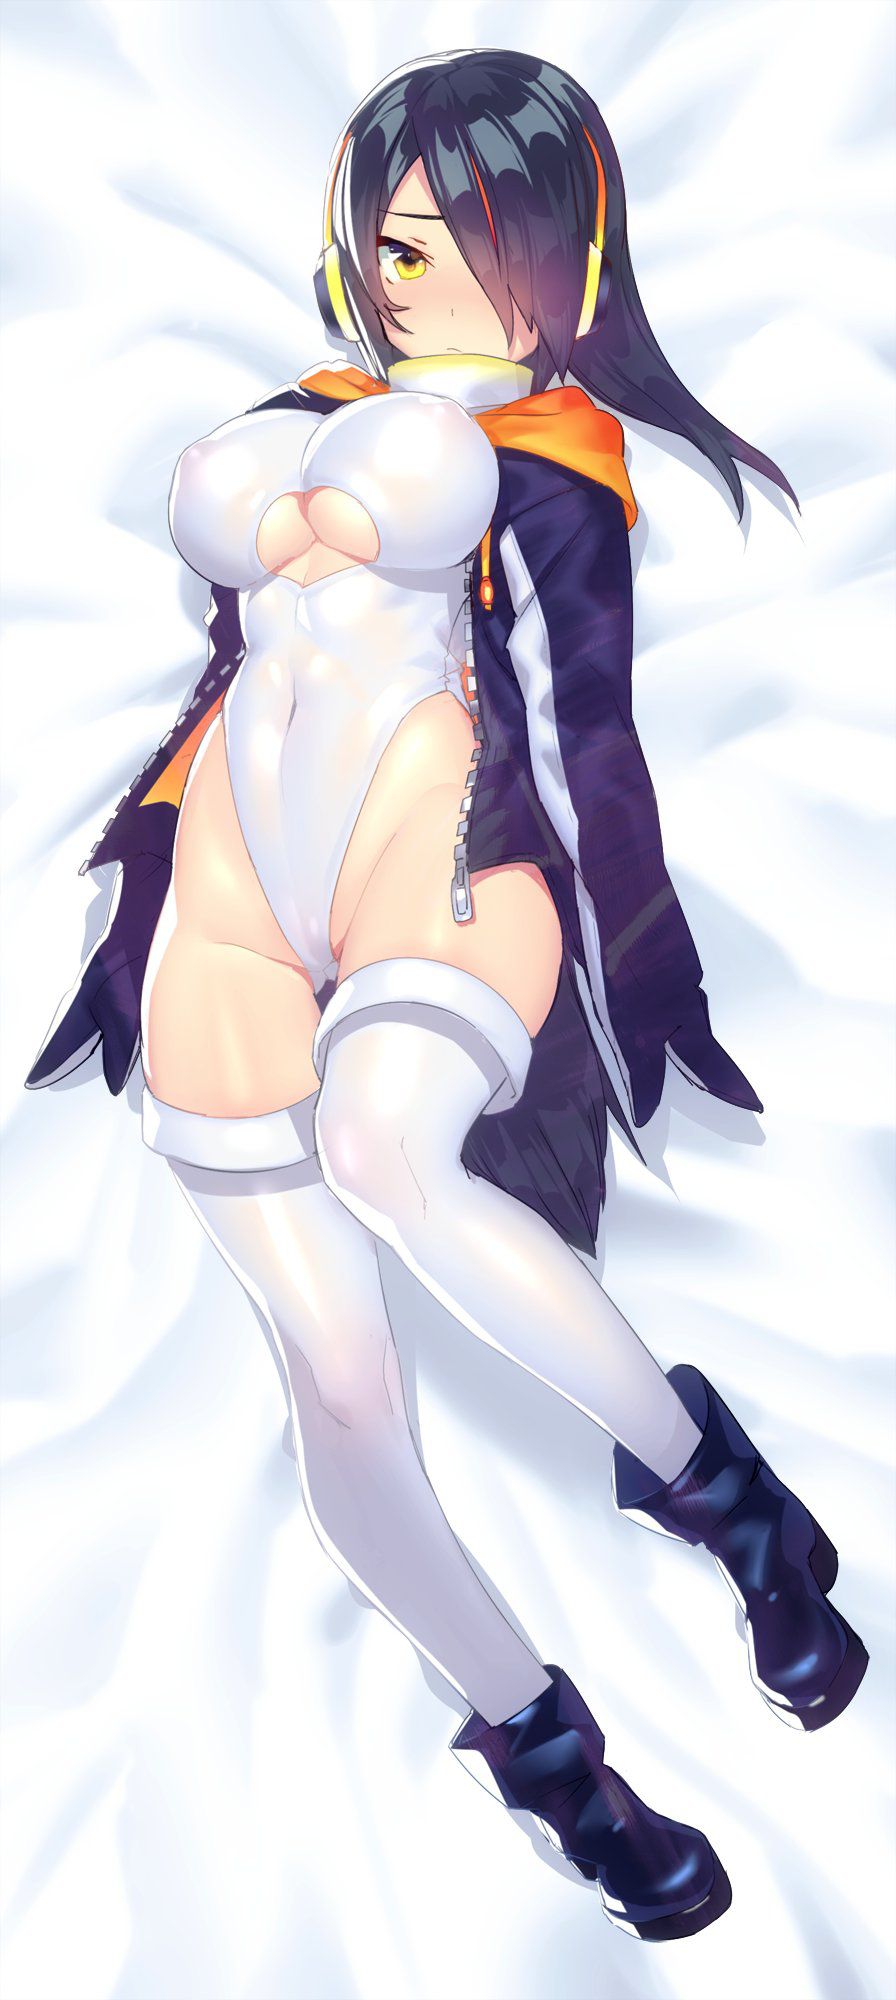 Erotic image that is coming out of the kotei penguin of Ahe face that is about to fall into pleasure! 【Kemono Friends】 6